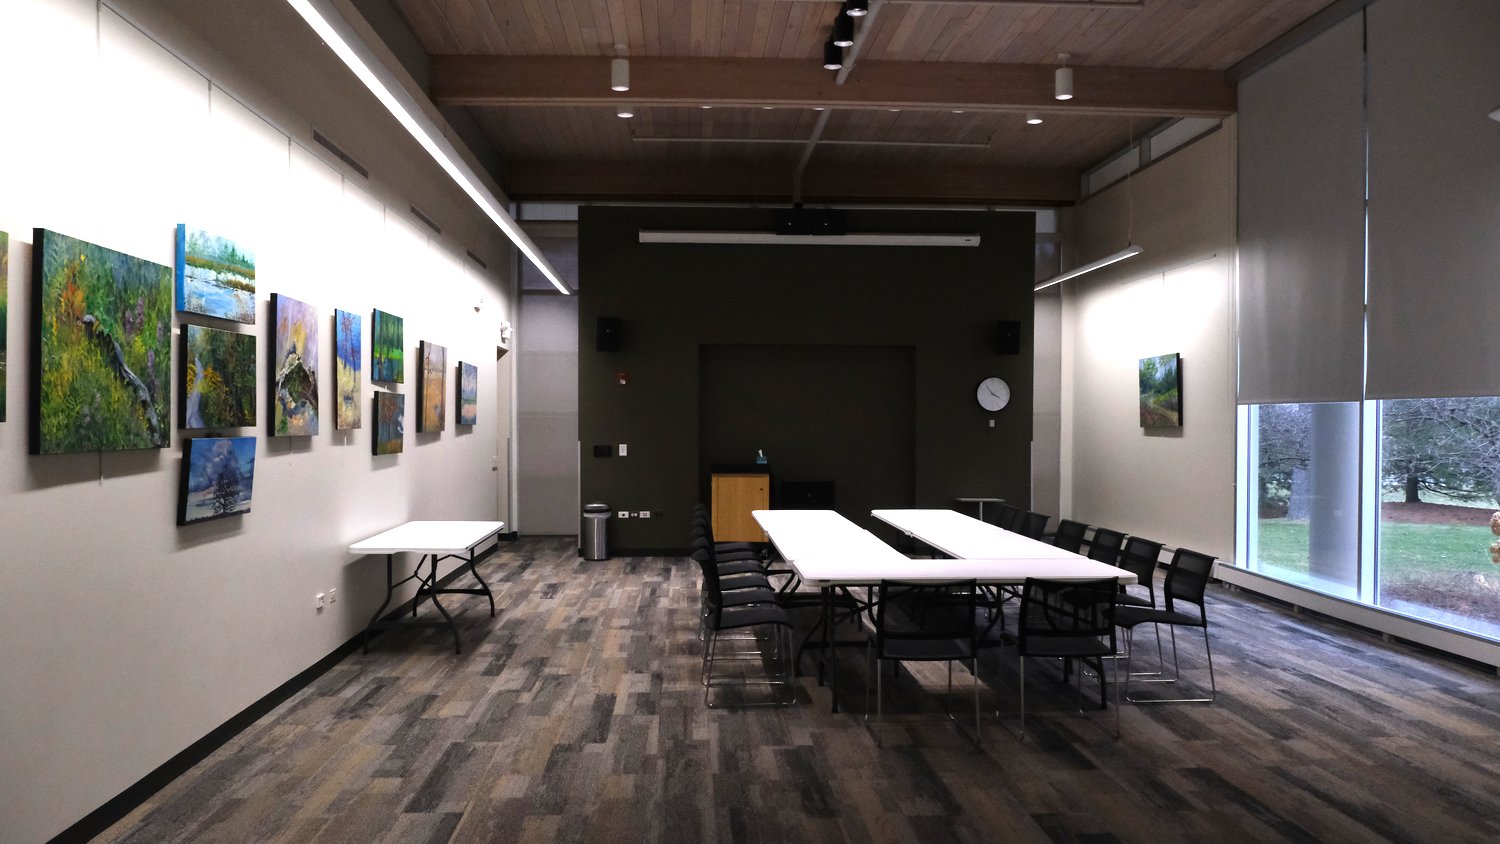 The Lincoln Room meeting space also serves as an art gallery space.